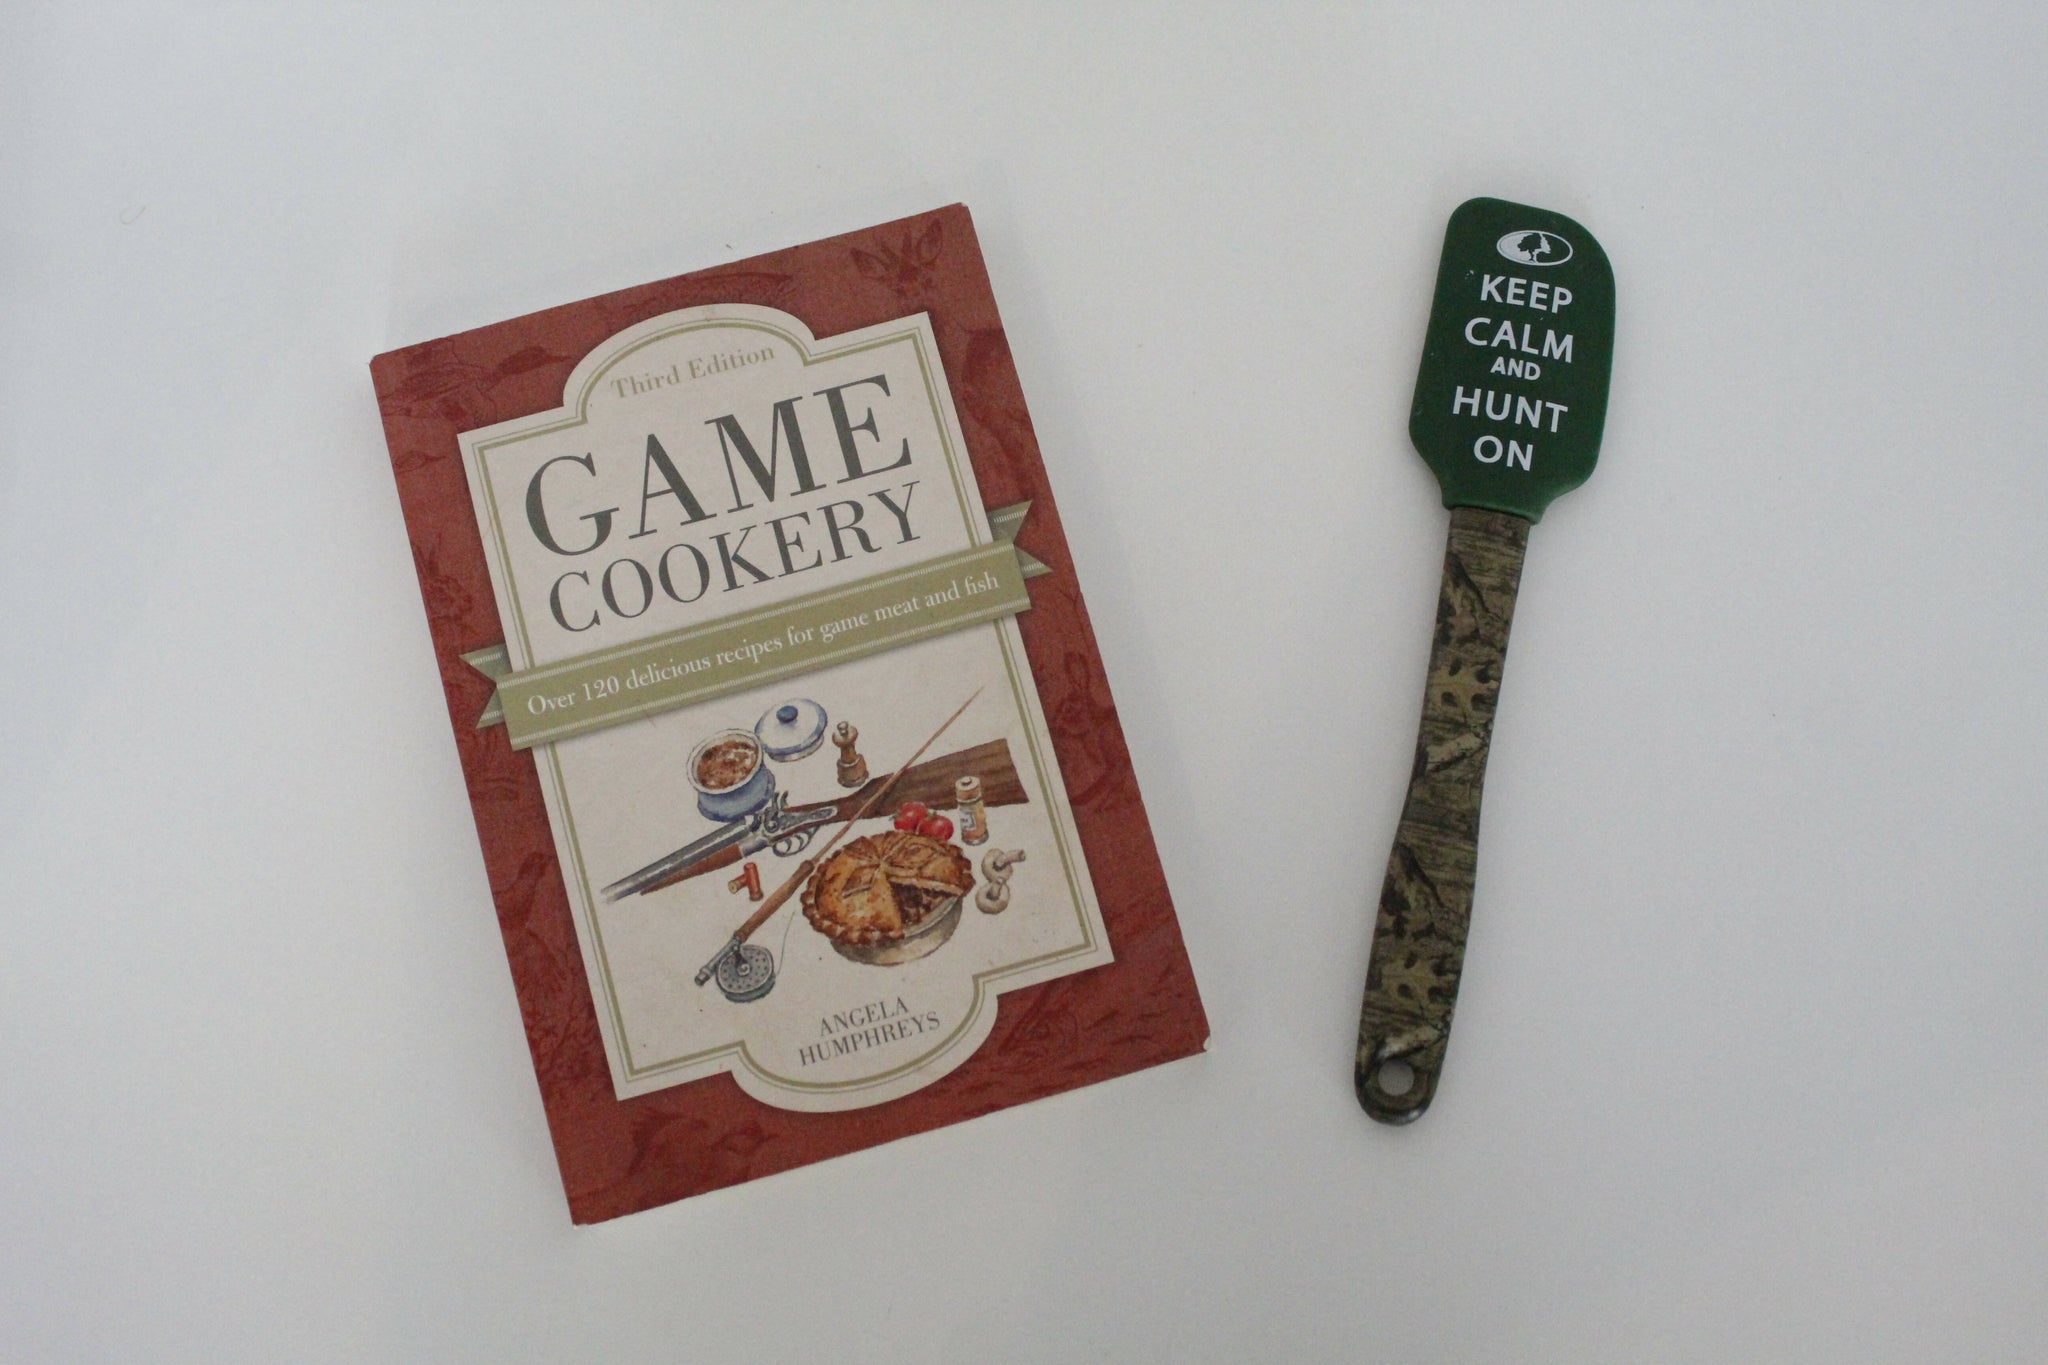 Game Cookery Cookbook and Mossy Oak Spatula